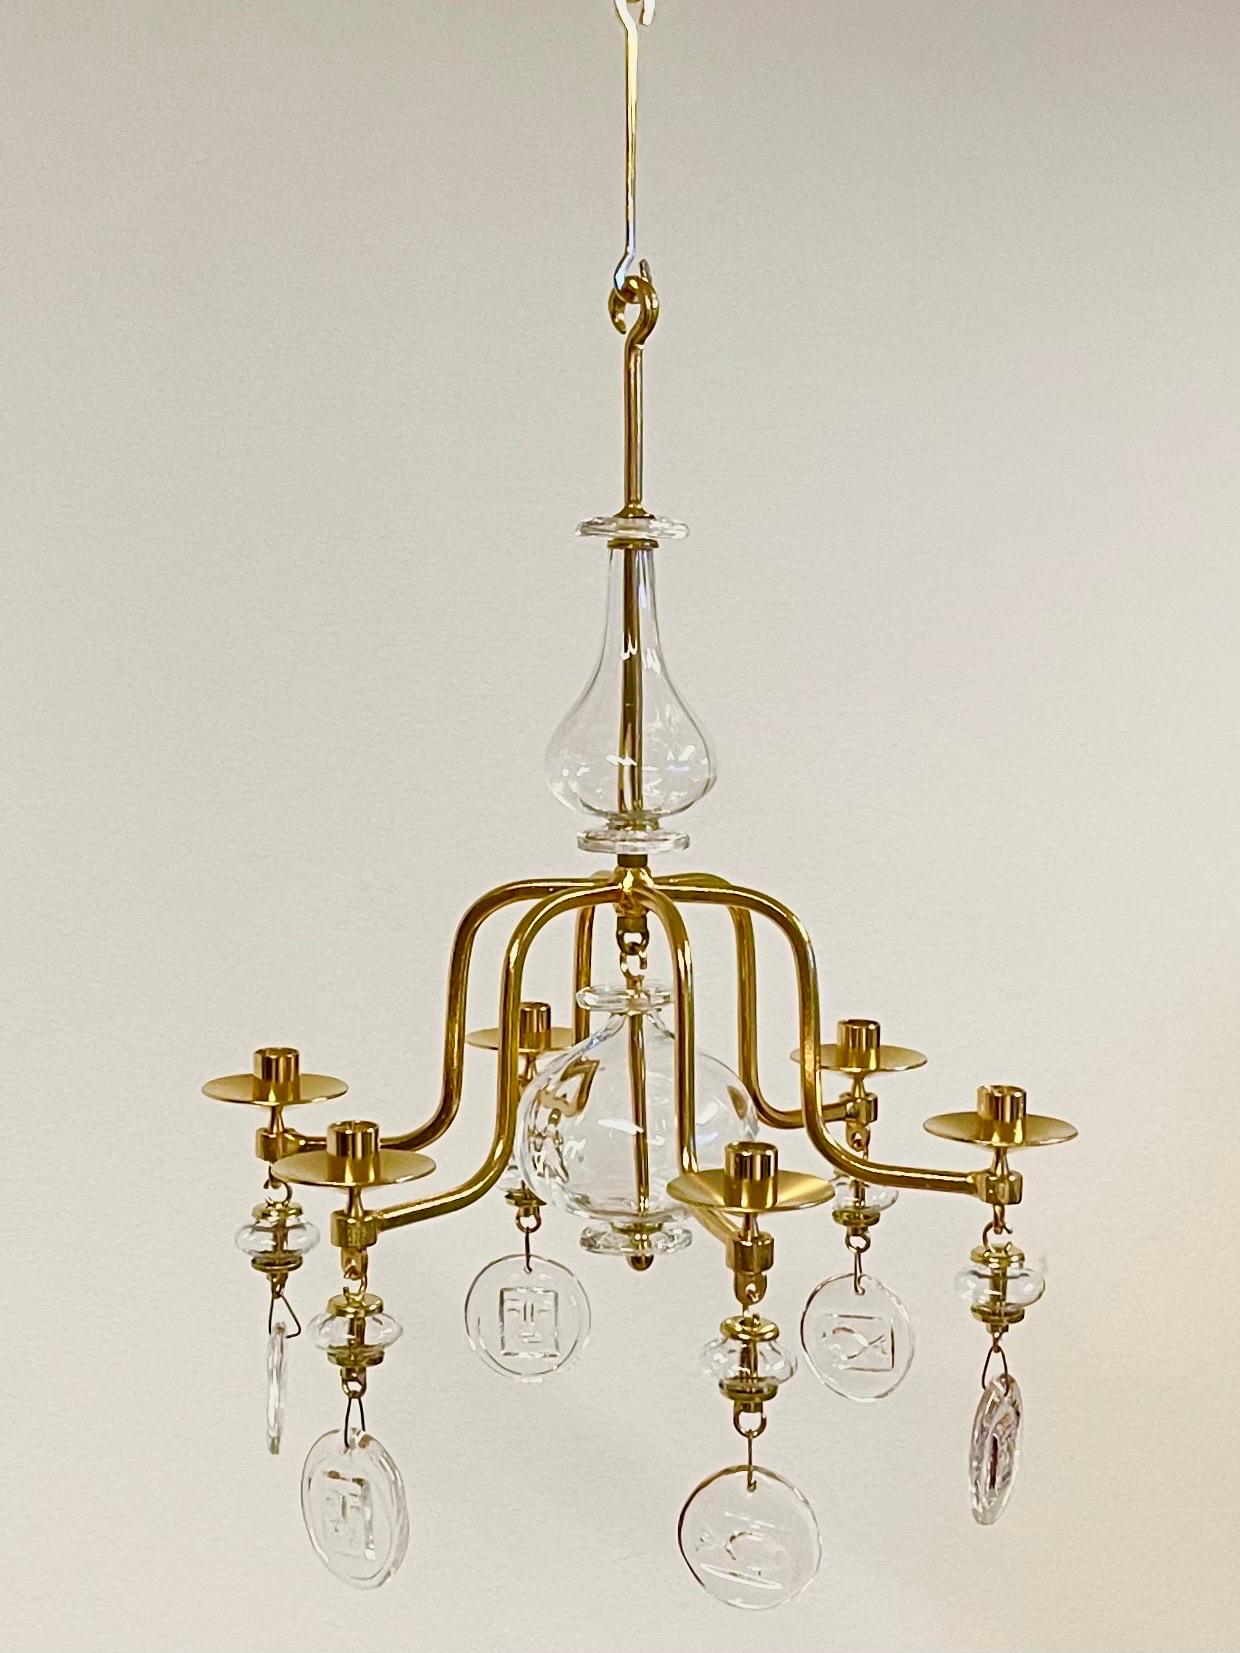 This is the Swedish forged, six-armed gilded candle chandelier, designed by Erik Höglund for Boda Glasbruk.
This model is one of several, both in gilt and bare steel, designed in the 1960s. Only a few models were produced with gilding.

This